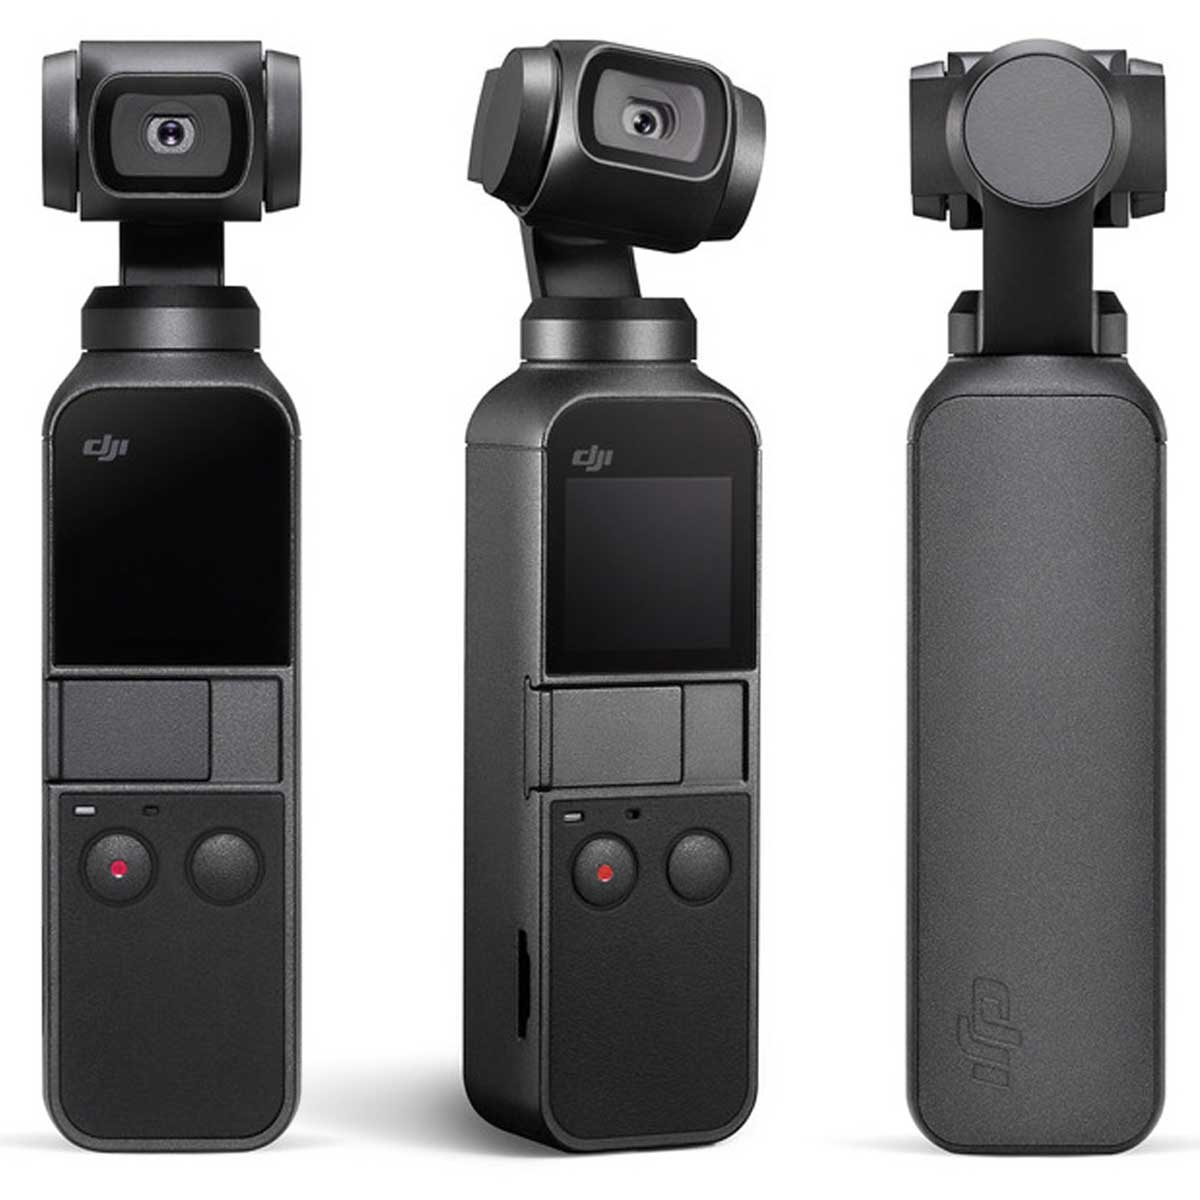 DJI Osmo Pocket Handheld 3 Axis Gimbal Stabilizer with integrated